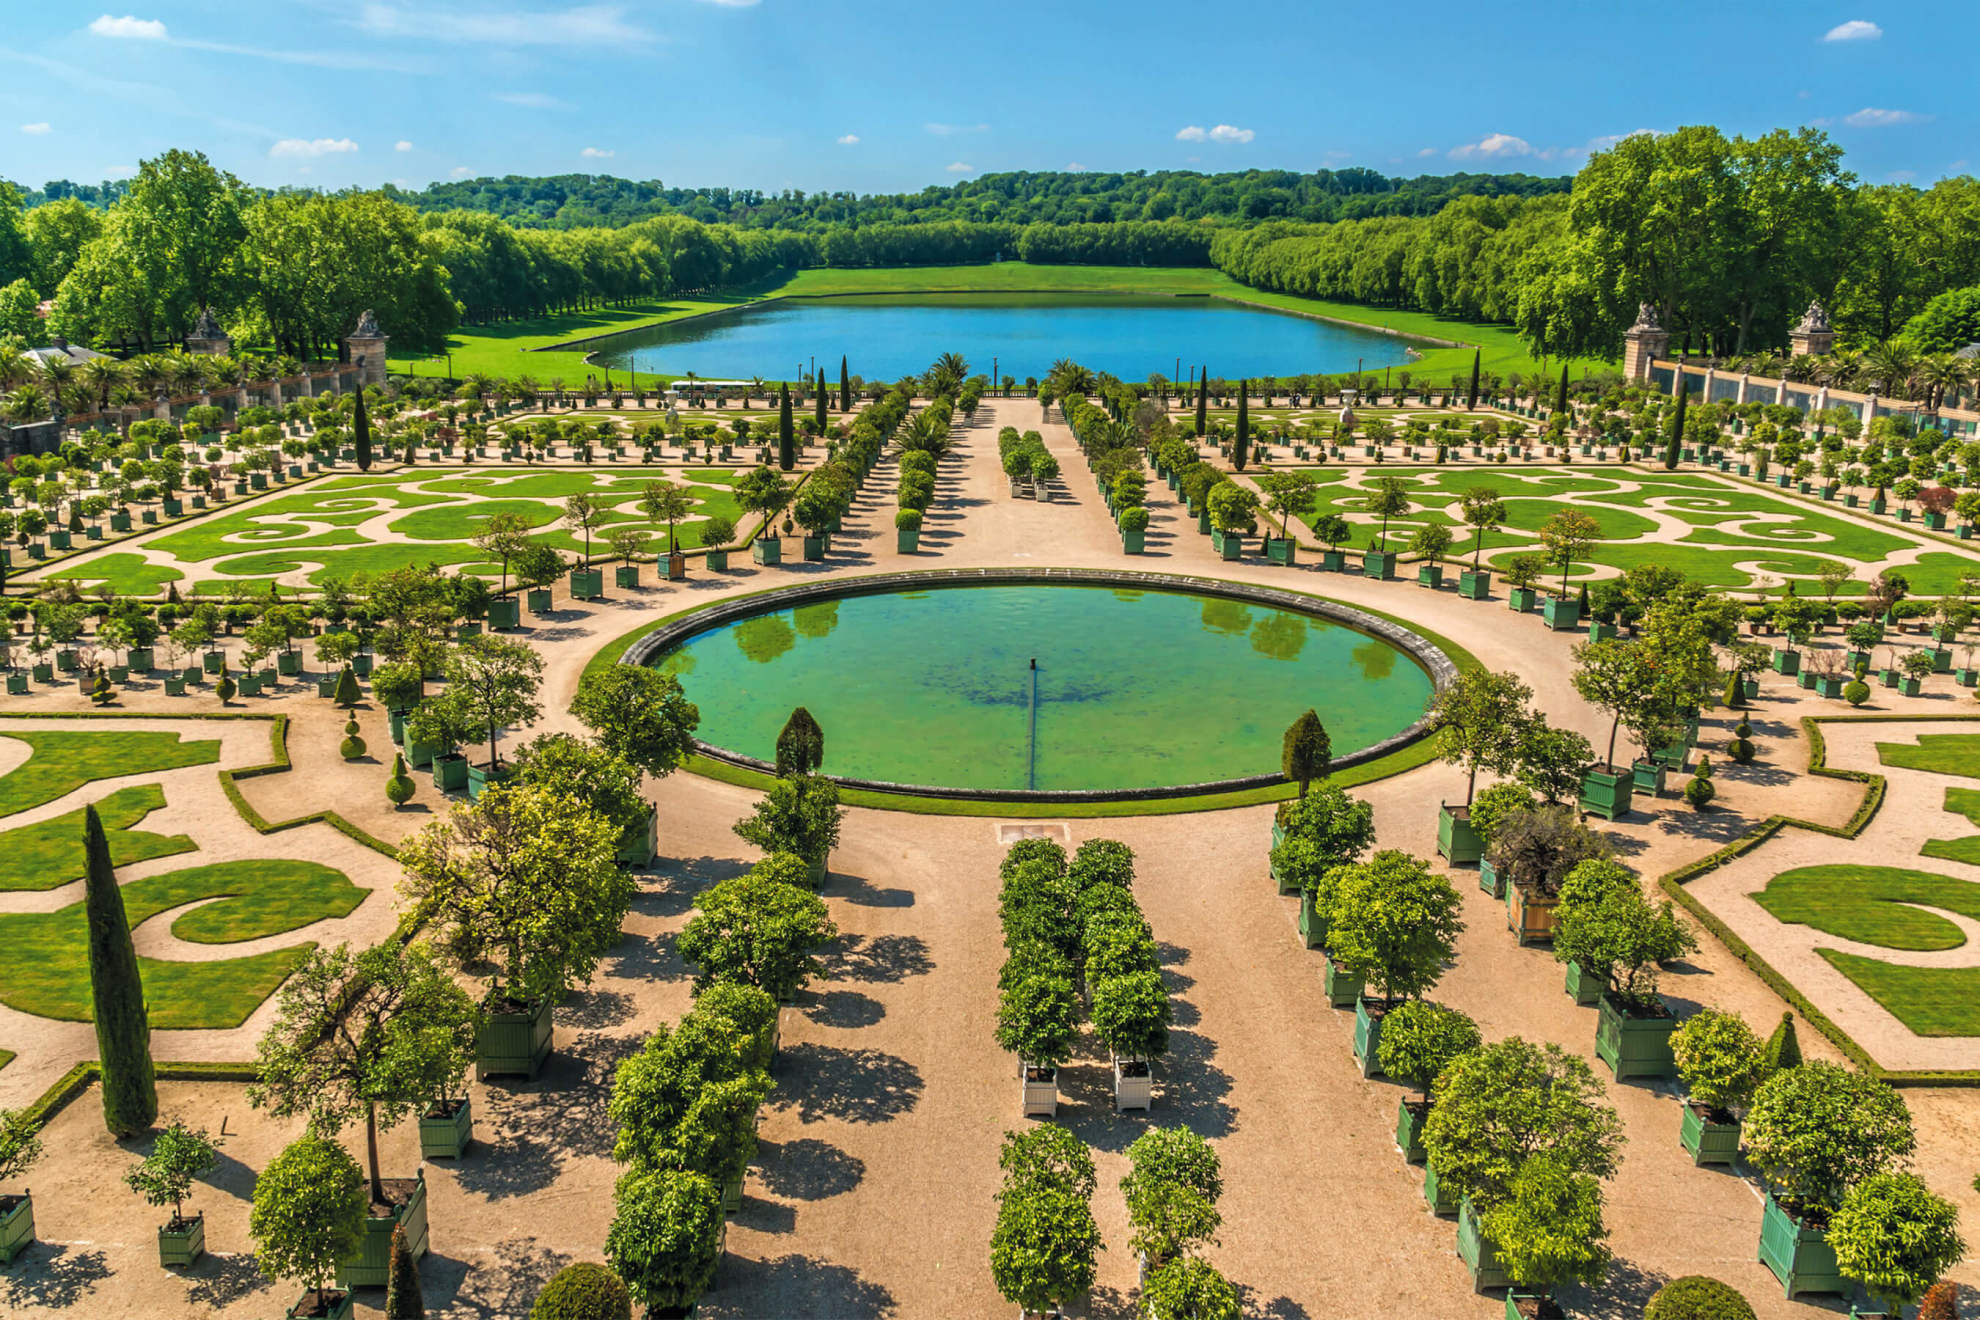 The gardens at the Palace of Versailles © Shutterstock